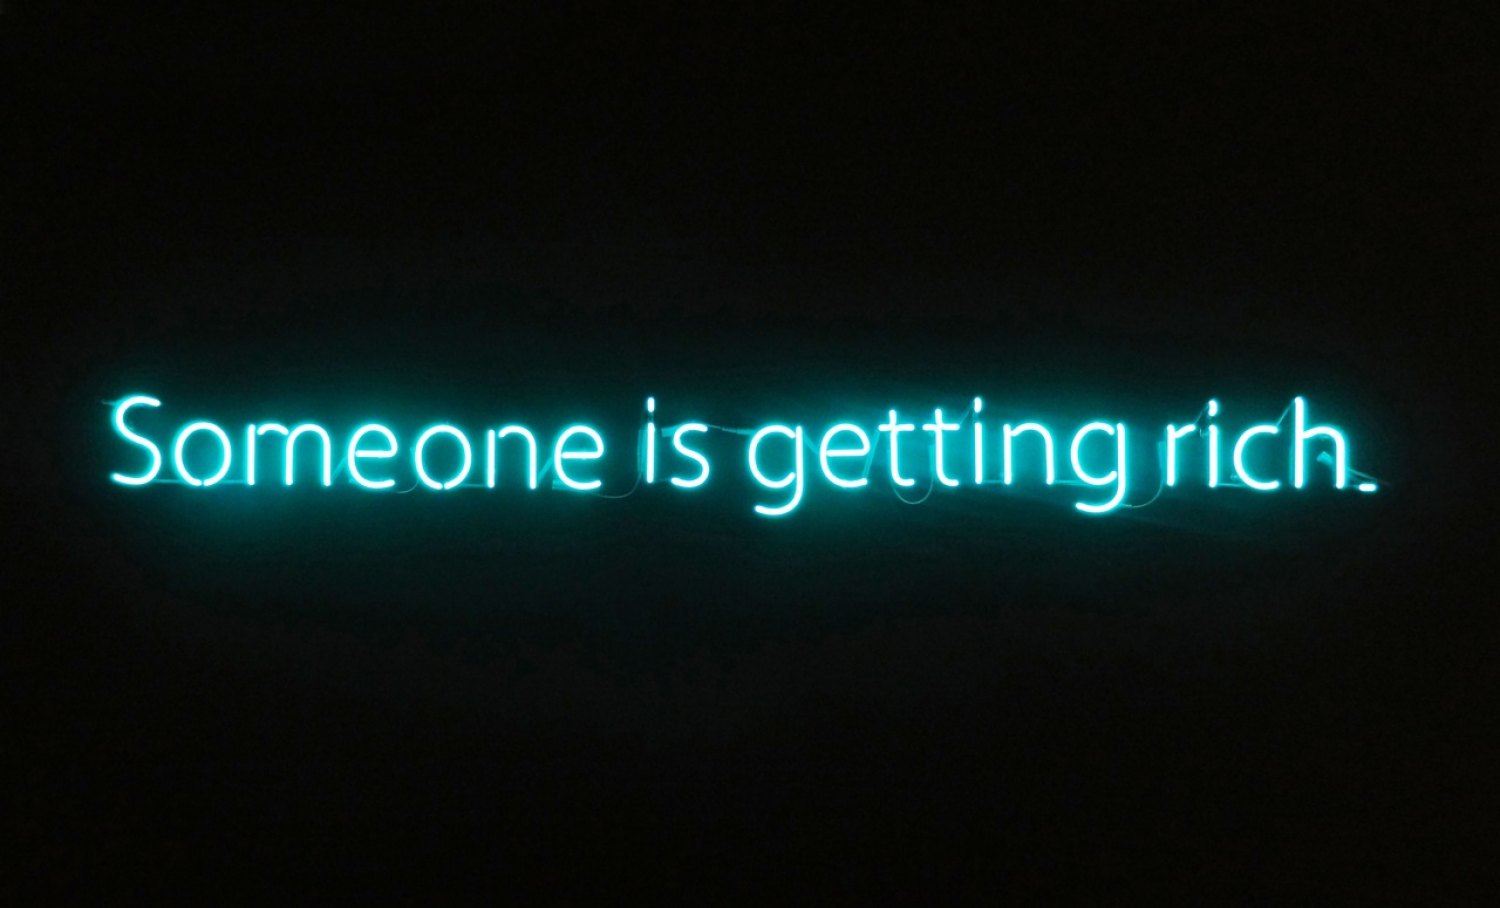 Claire Fontaine  Untitled (Someone is getting rich), 2012 Tecnolux No.9 Super Turquoise, 10mm glass, mounted to black painted wall, window or ceiling, 15 × 223 × 4 cm